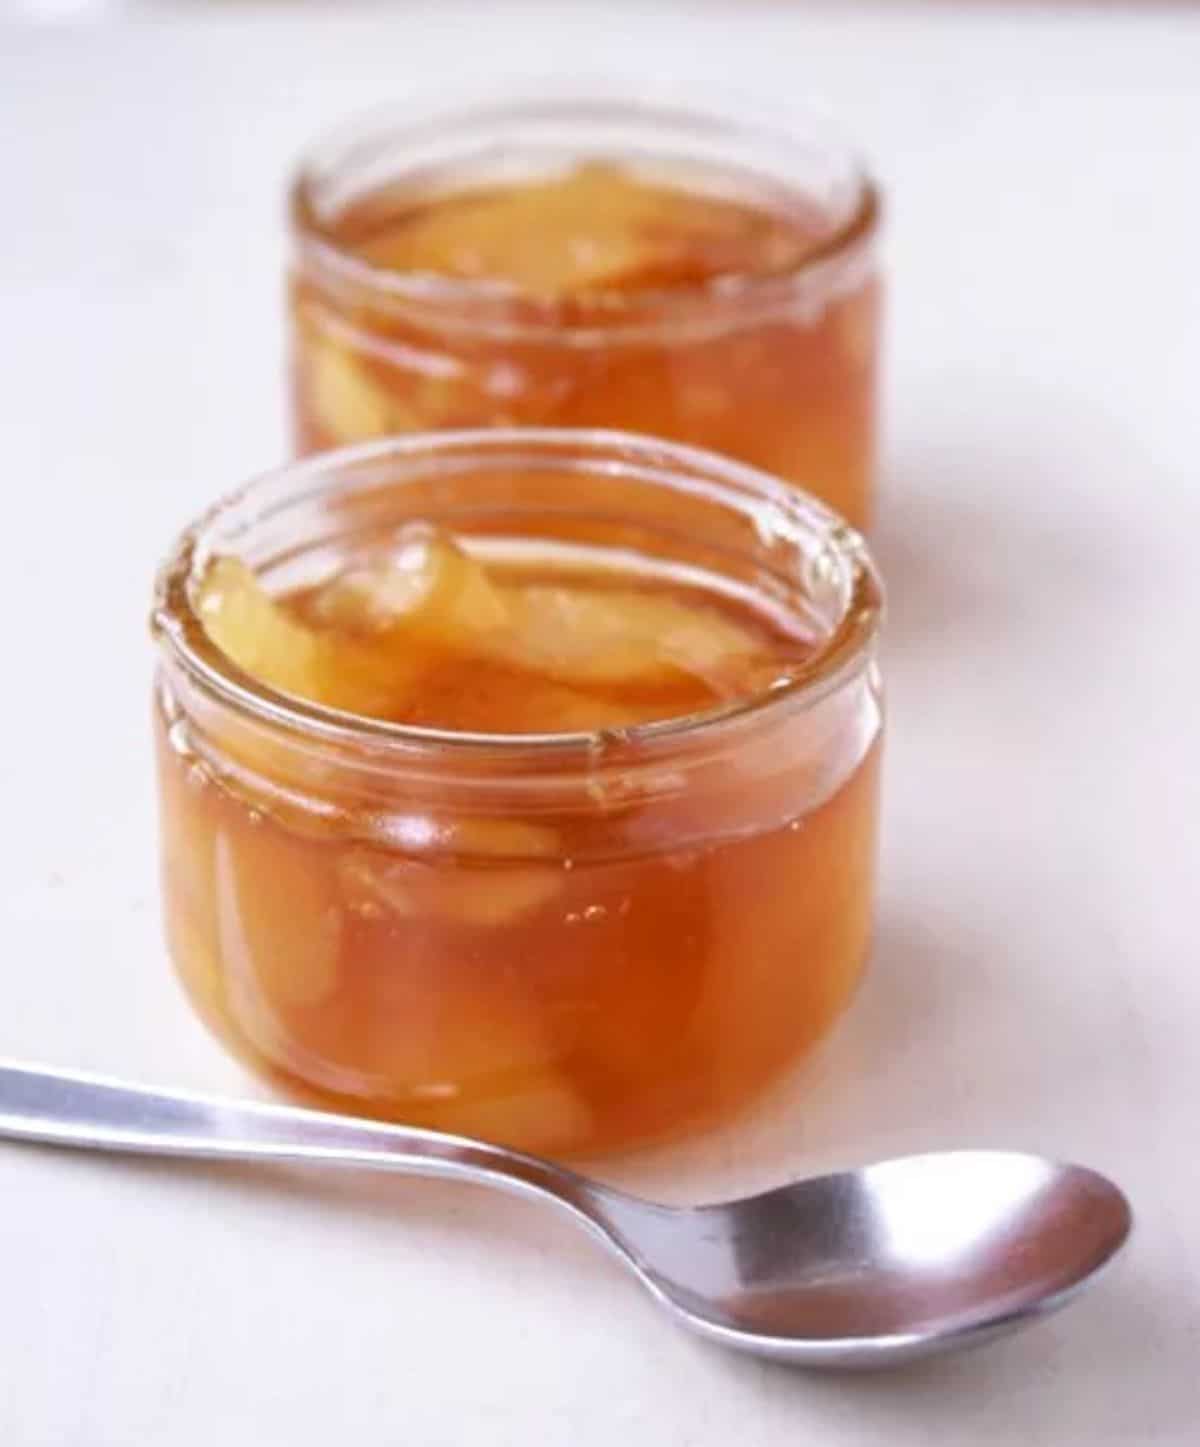 Pear jam with red tea in glass jars.